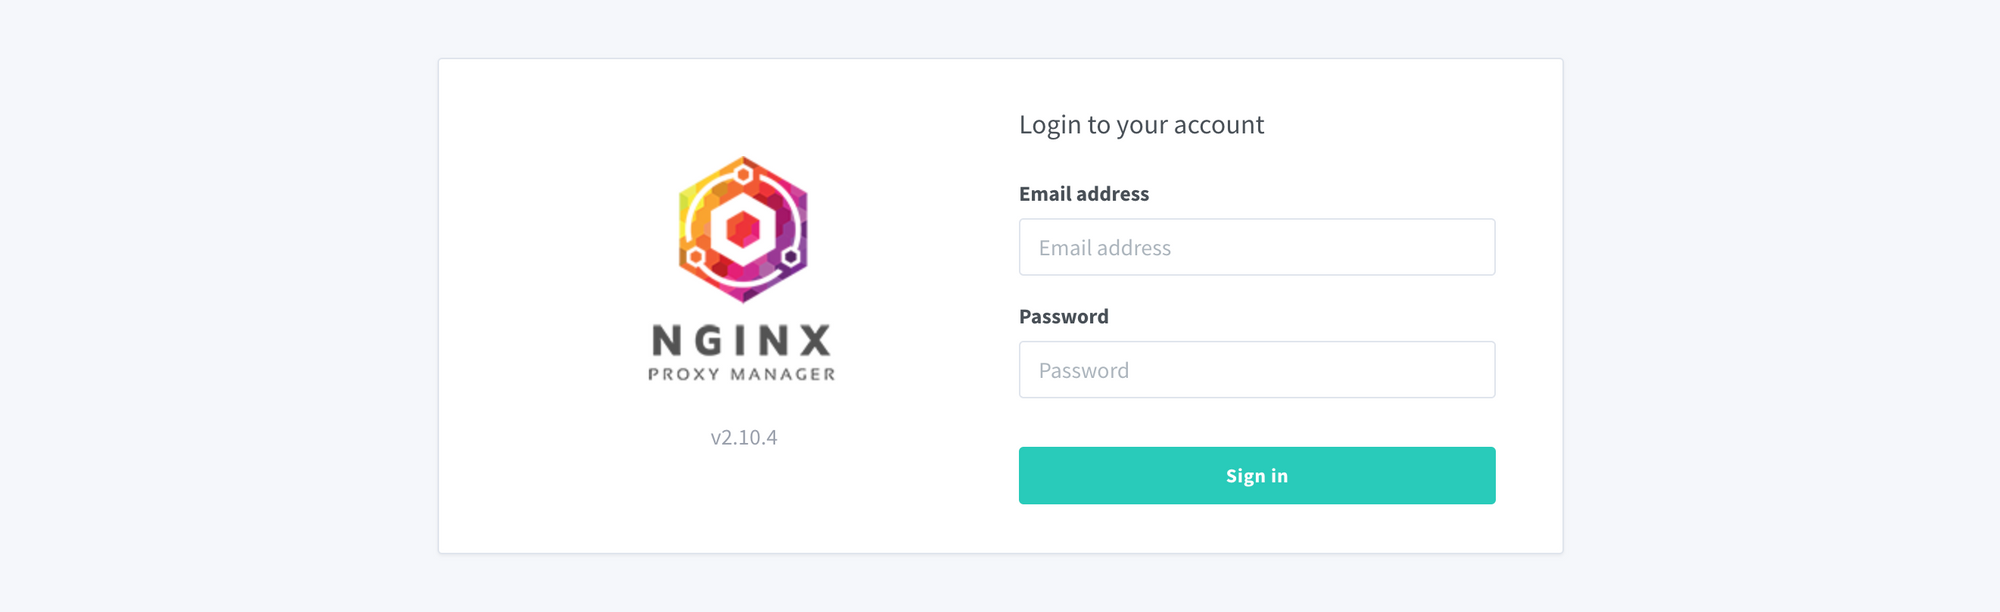 Nginx Proxy Manager login page